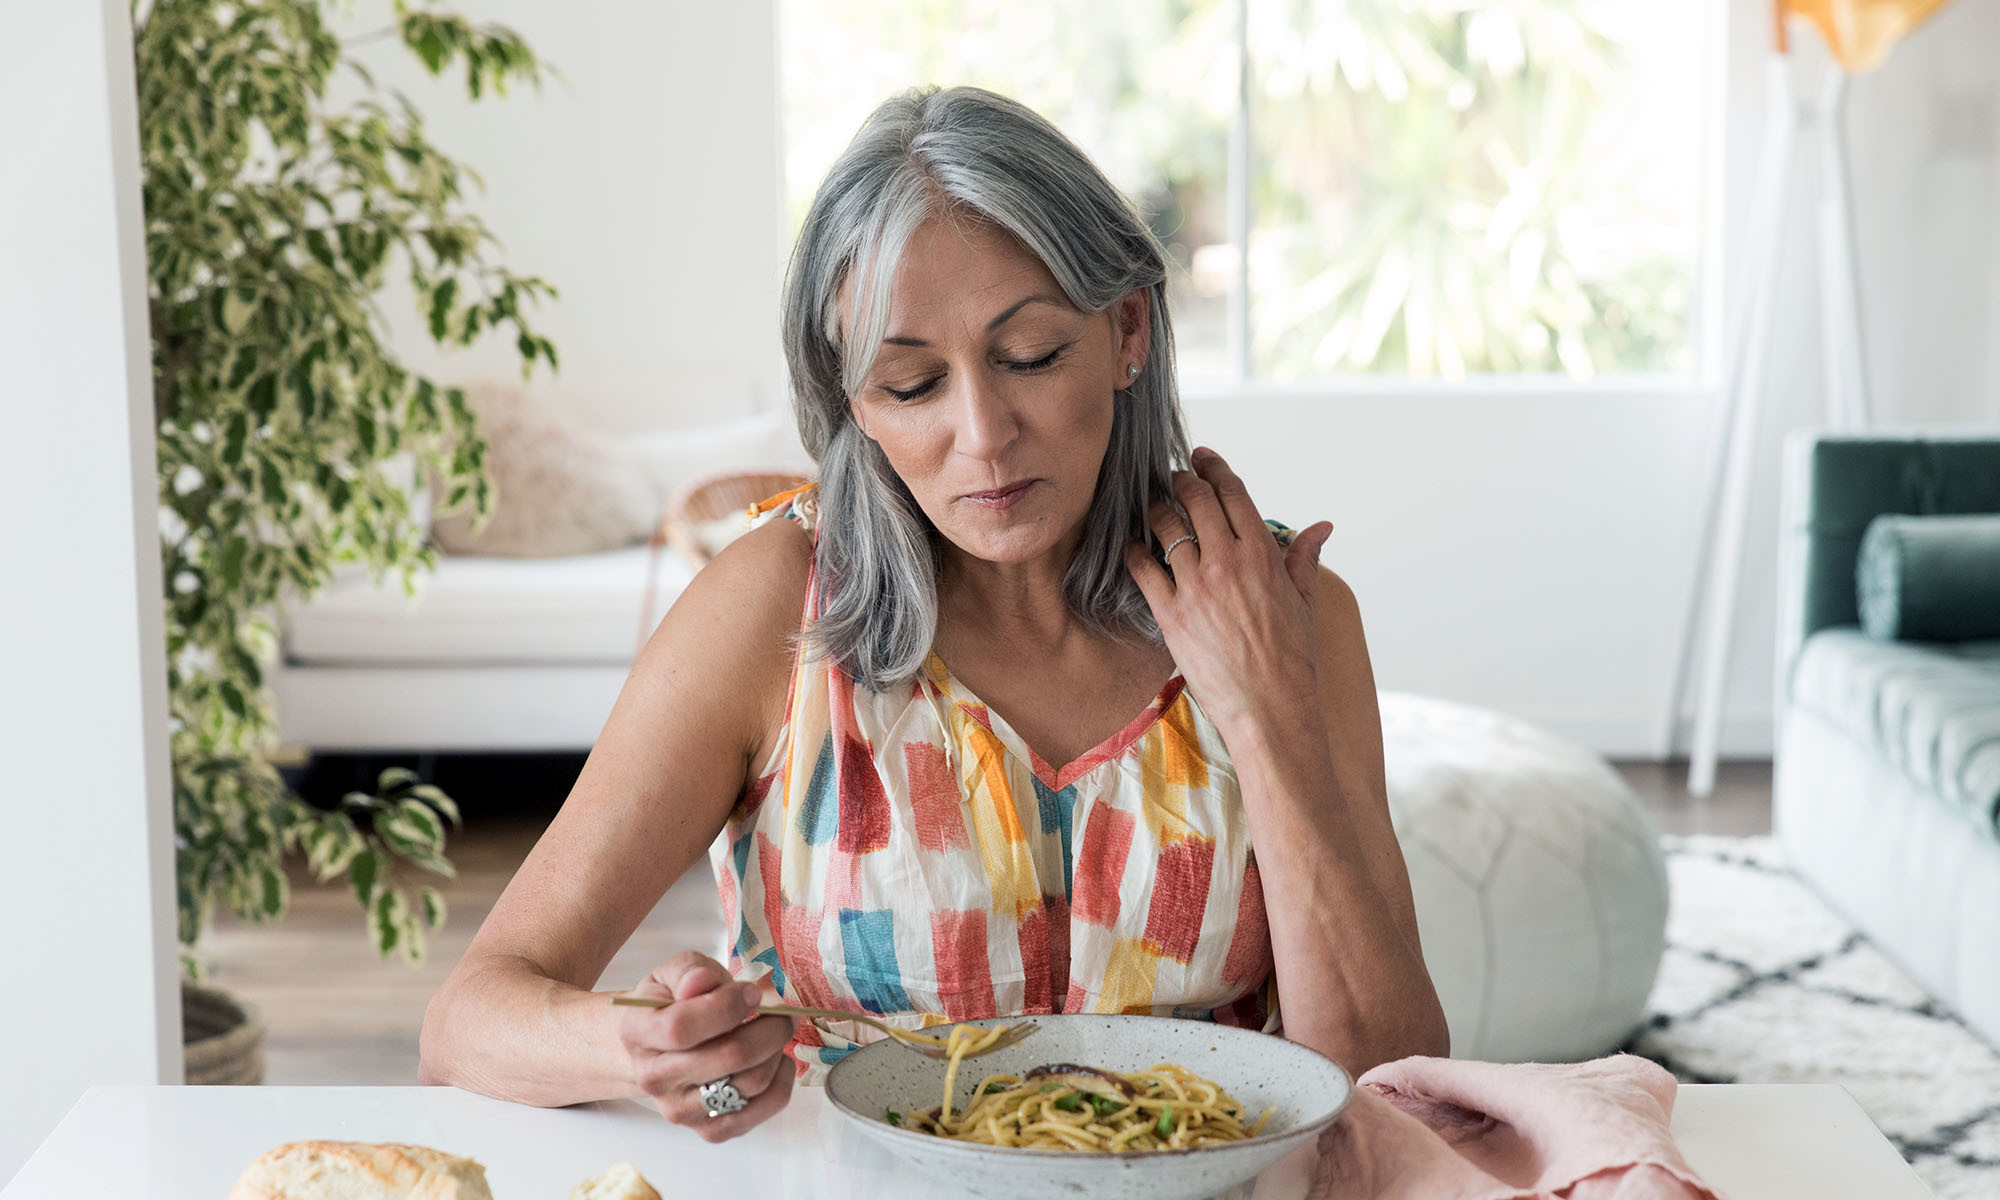 Over 50? Here Are MD-Approved Ways To Manage Appetite & Food Cravings